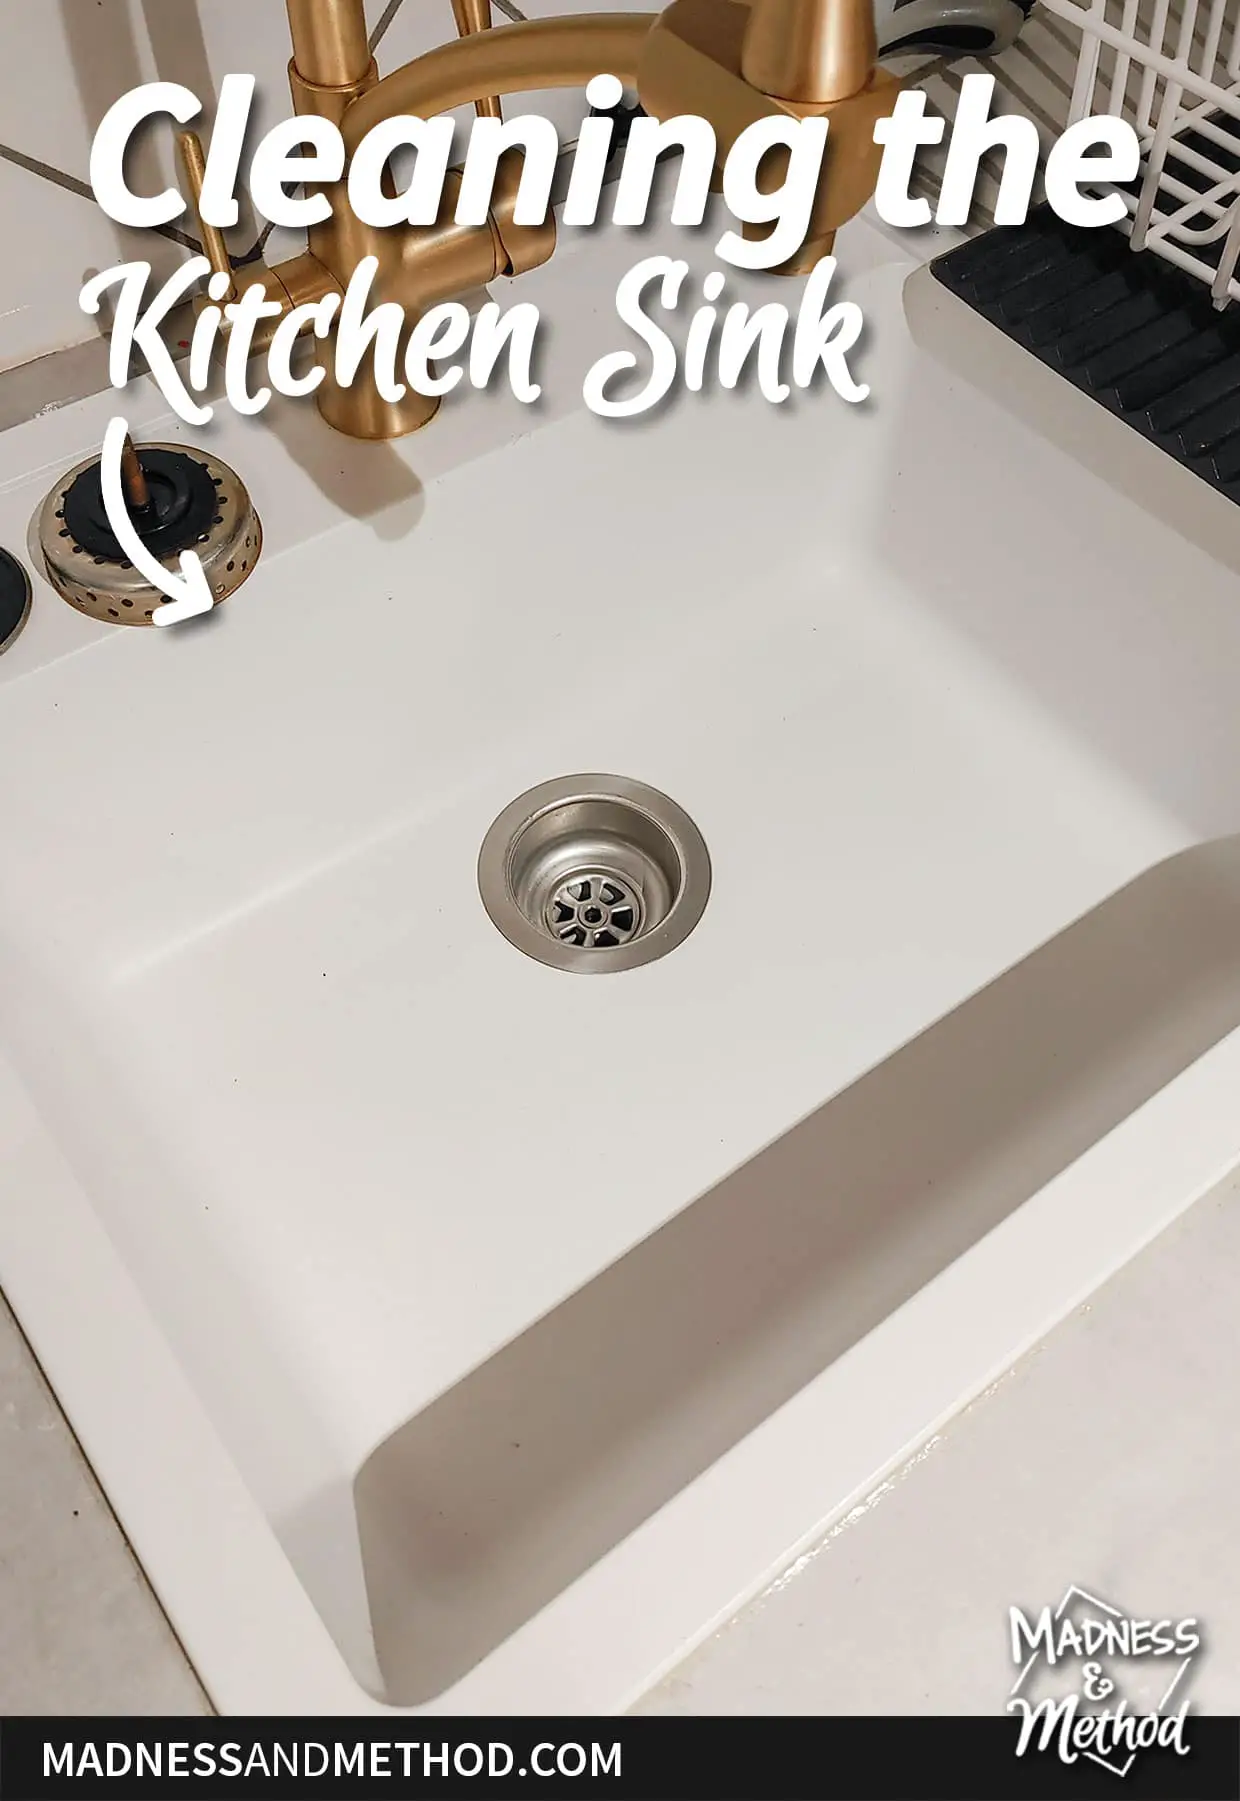 cleaning the kitchen sink text overlay on white sink